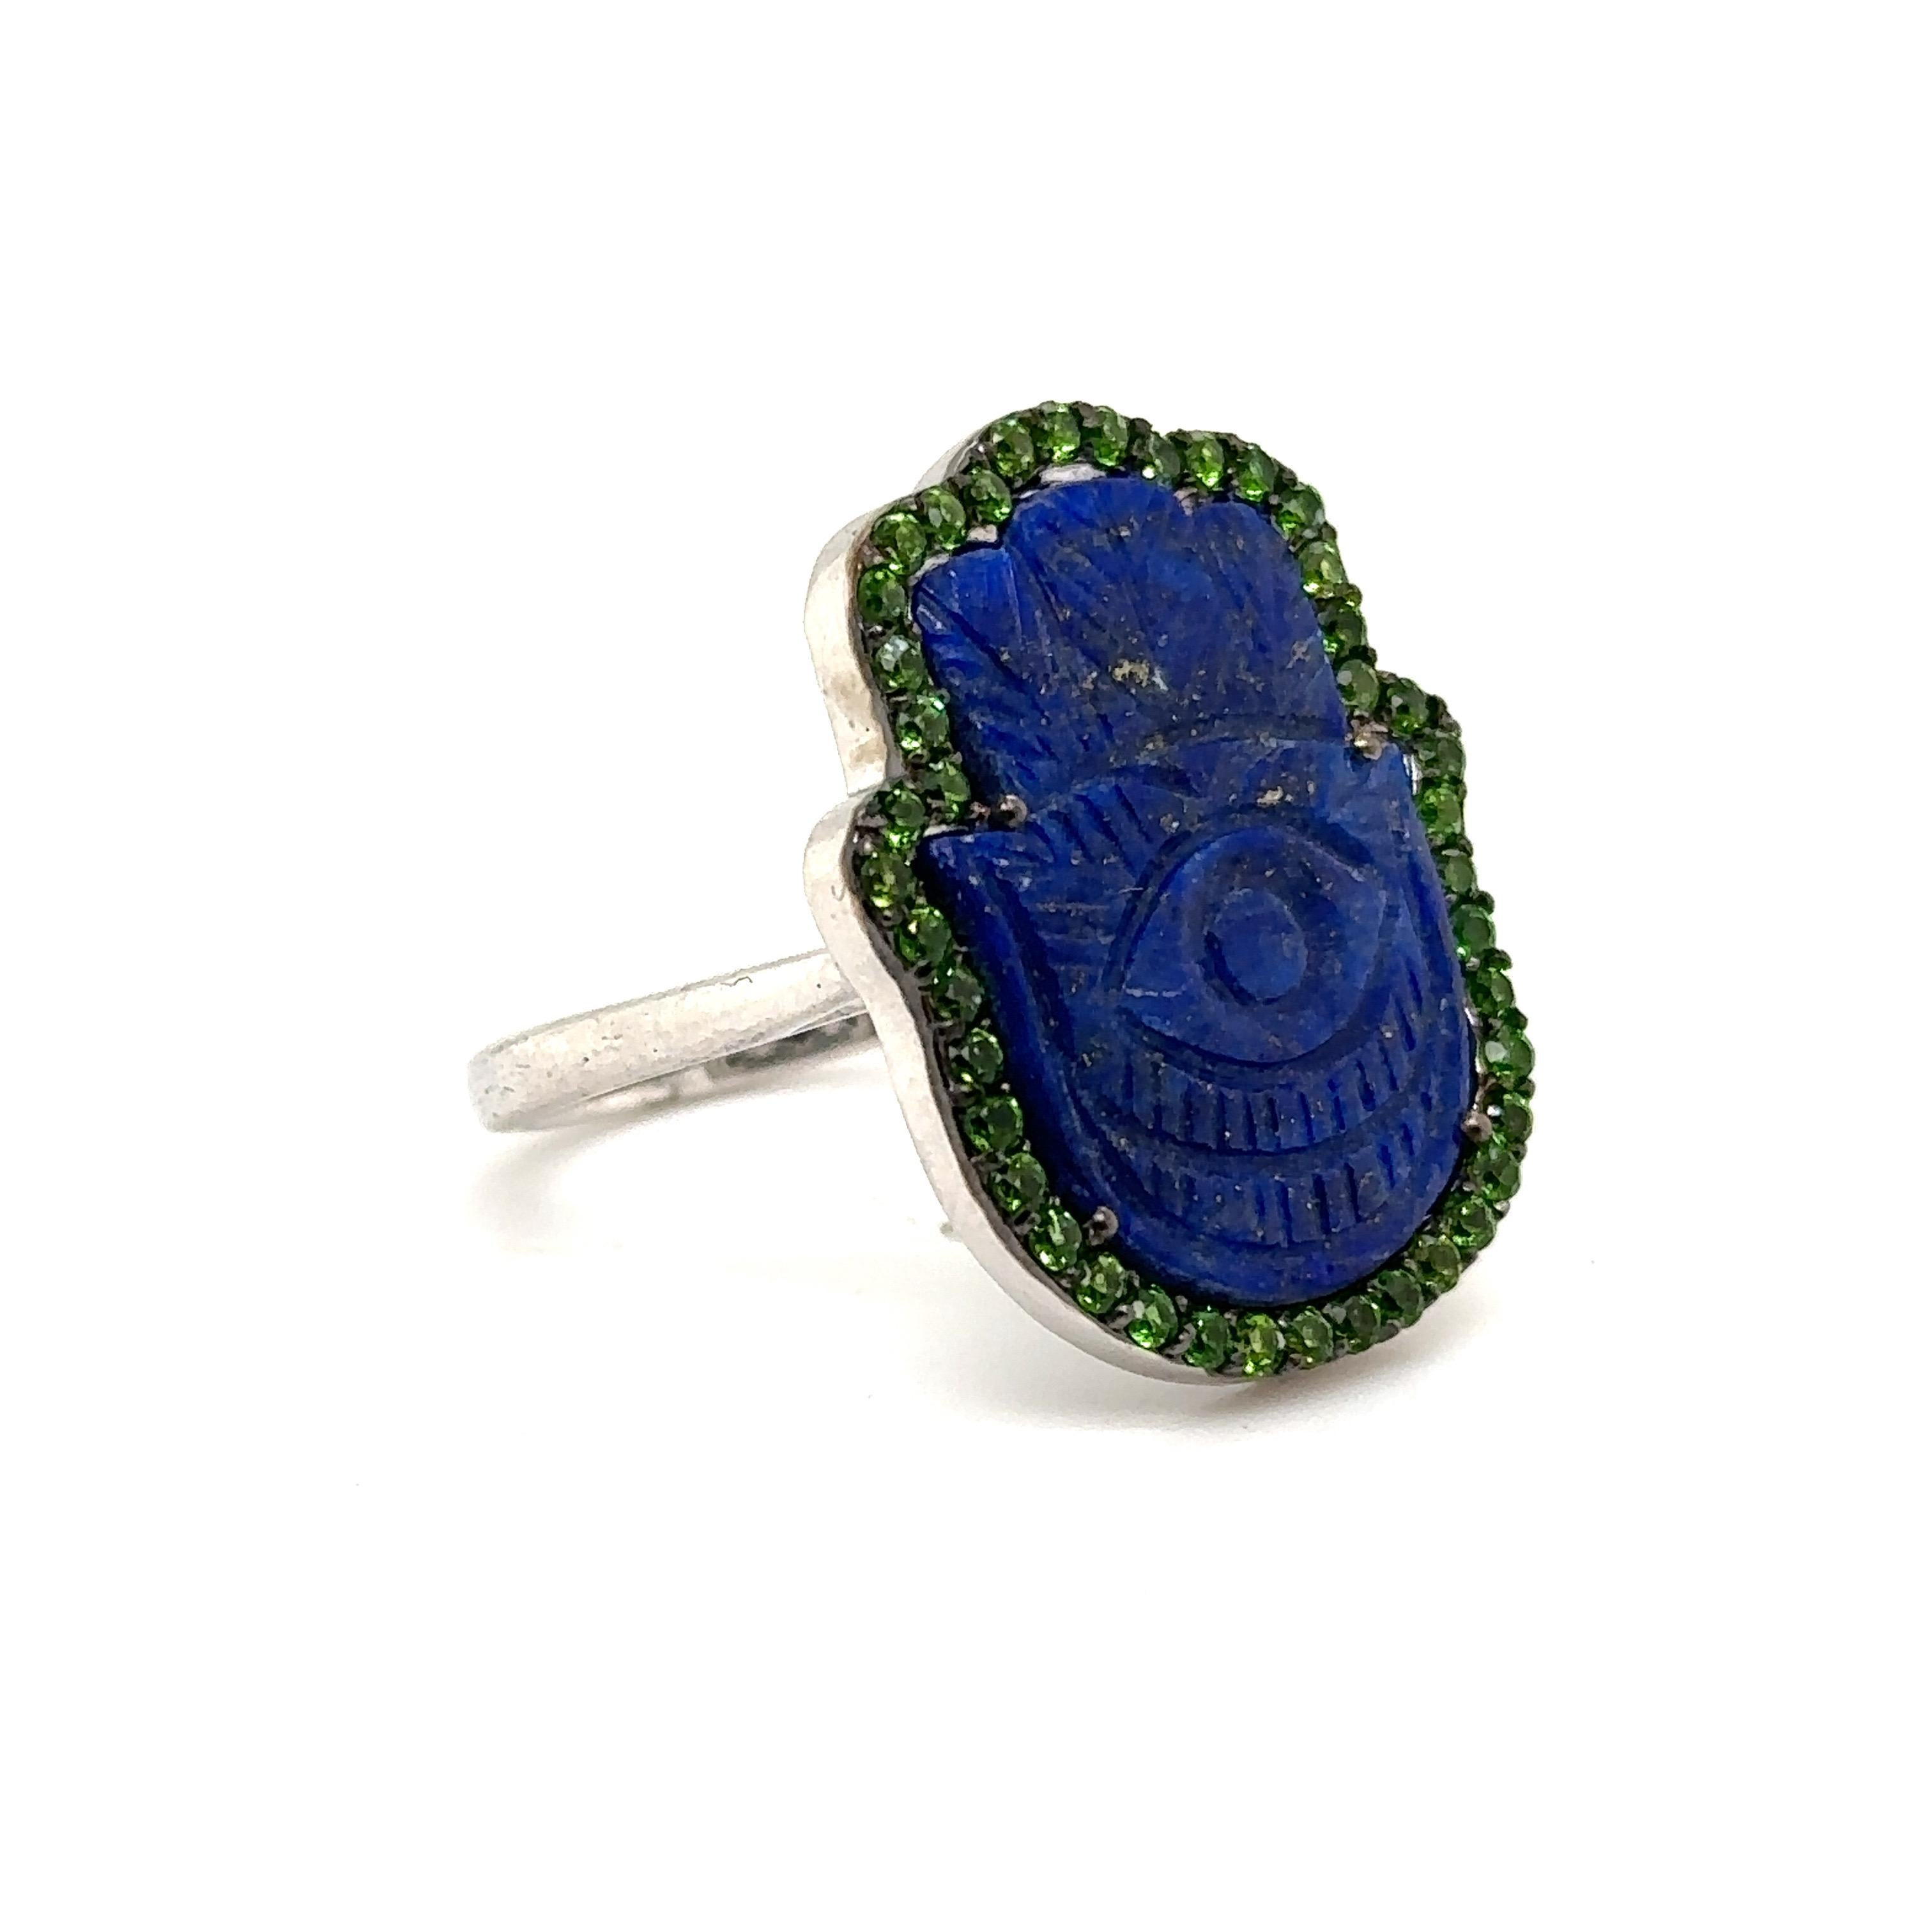 JAS-19-1962 - STERLING SILVER 10.00CT LAPIS HAMSA RING with CHROME DIOPSIDES 2